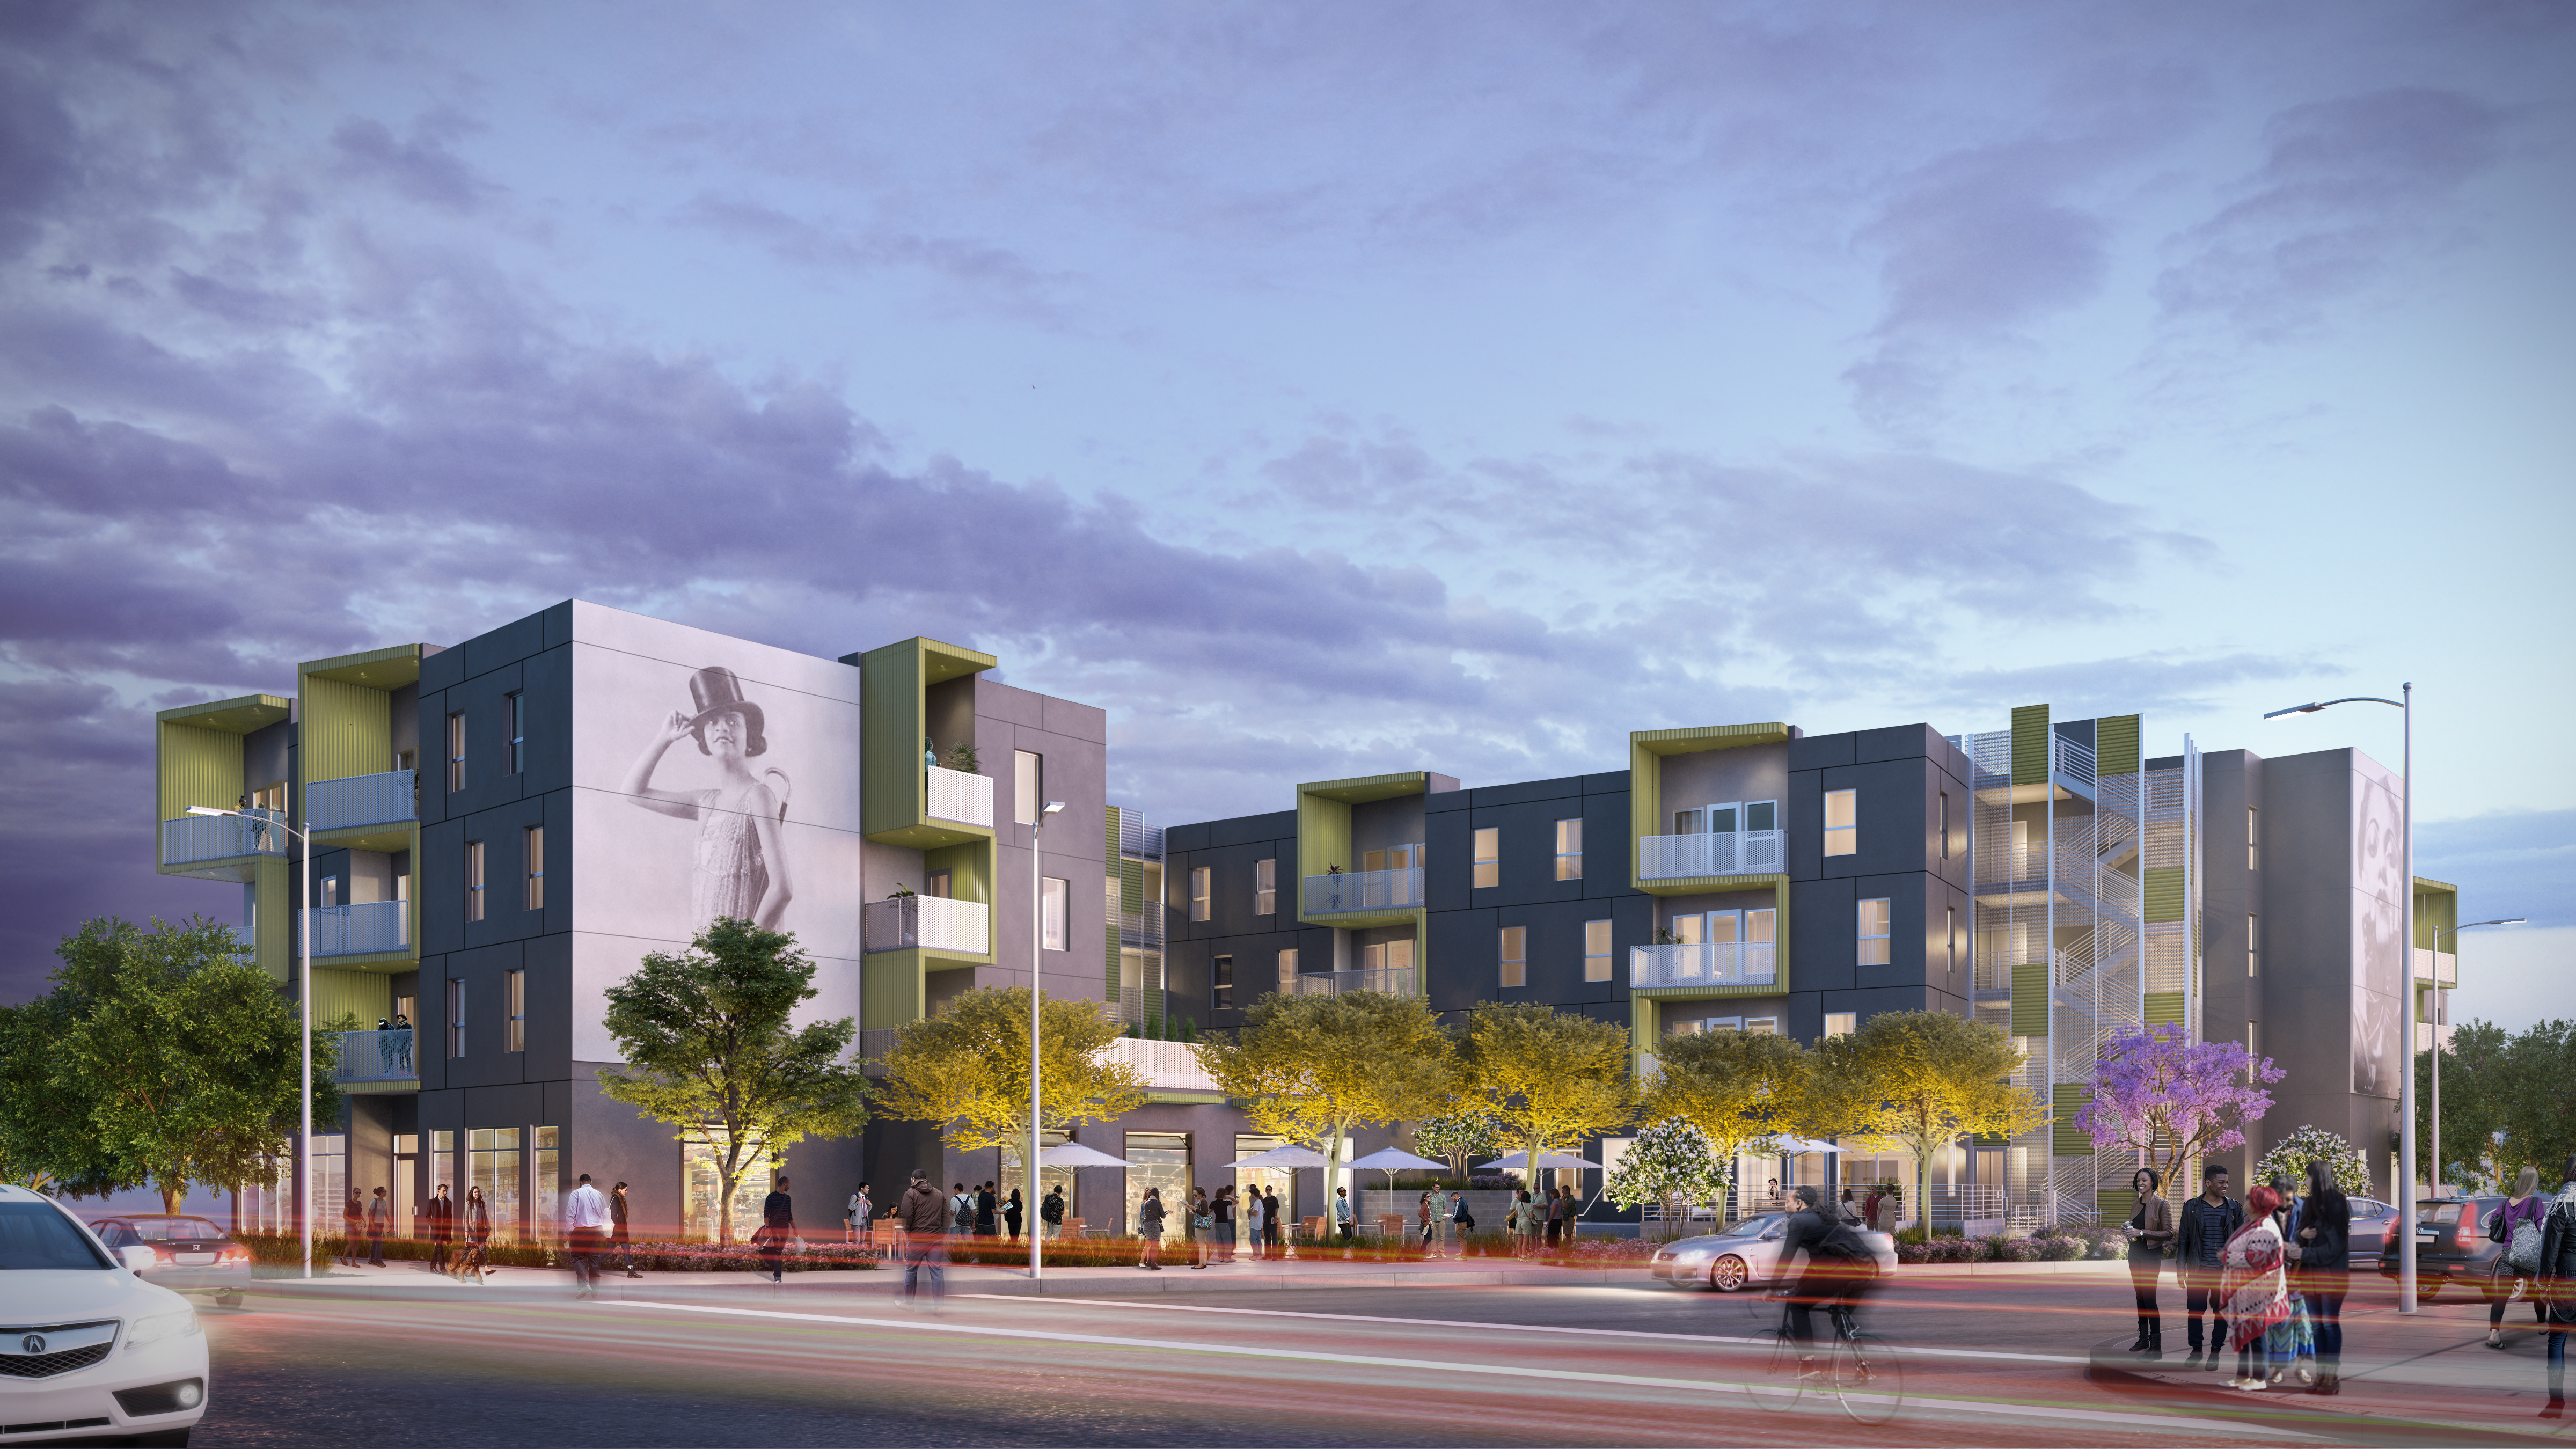 Street view of proposed three story project in green and blue color